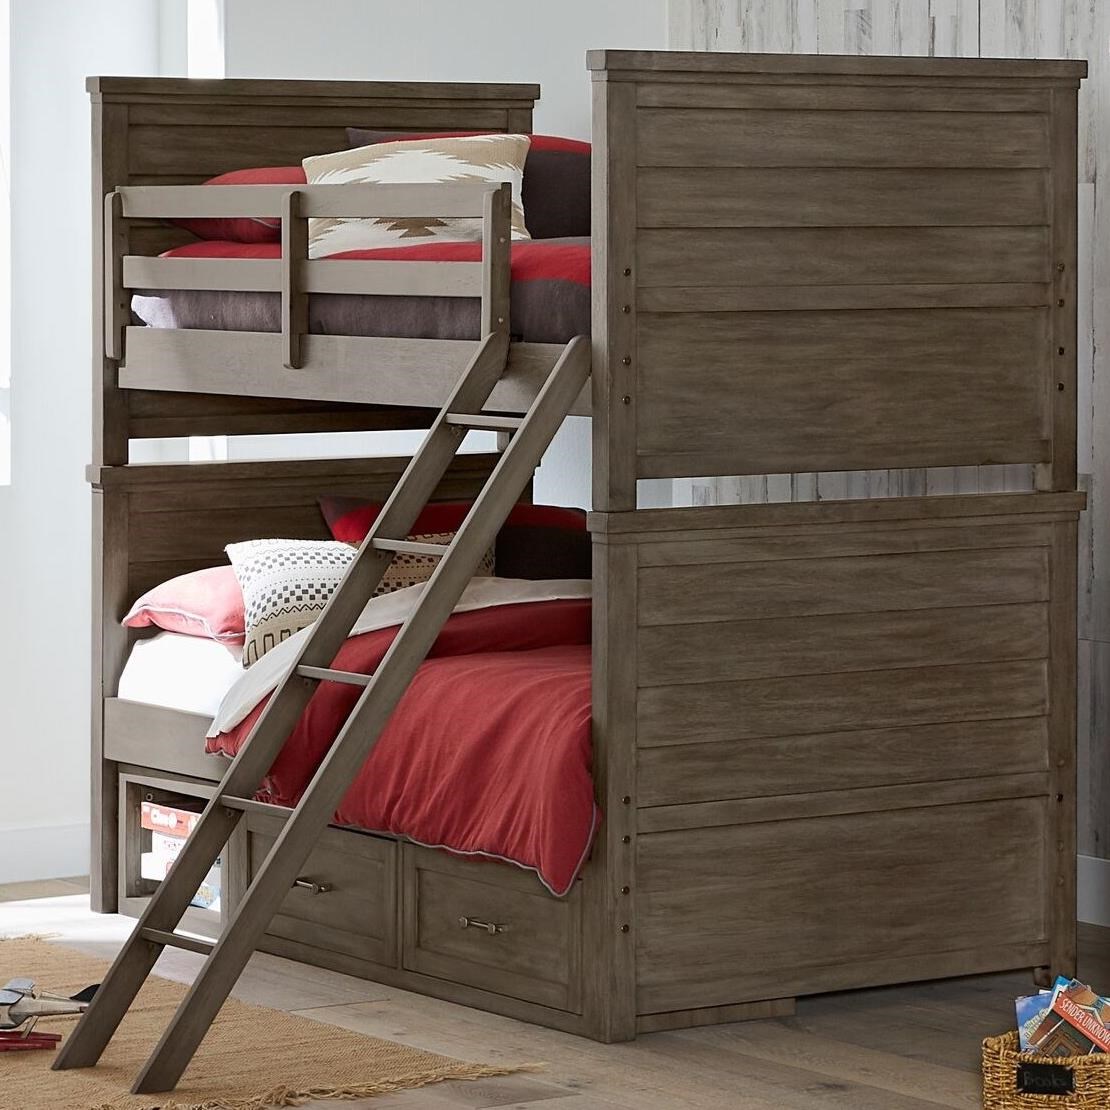 rustic bunk beds with storage